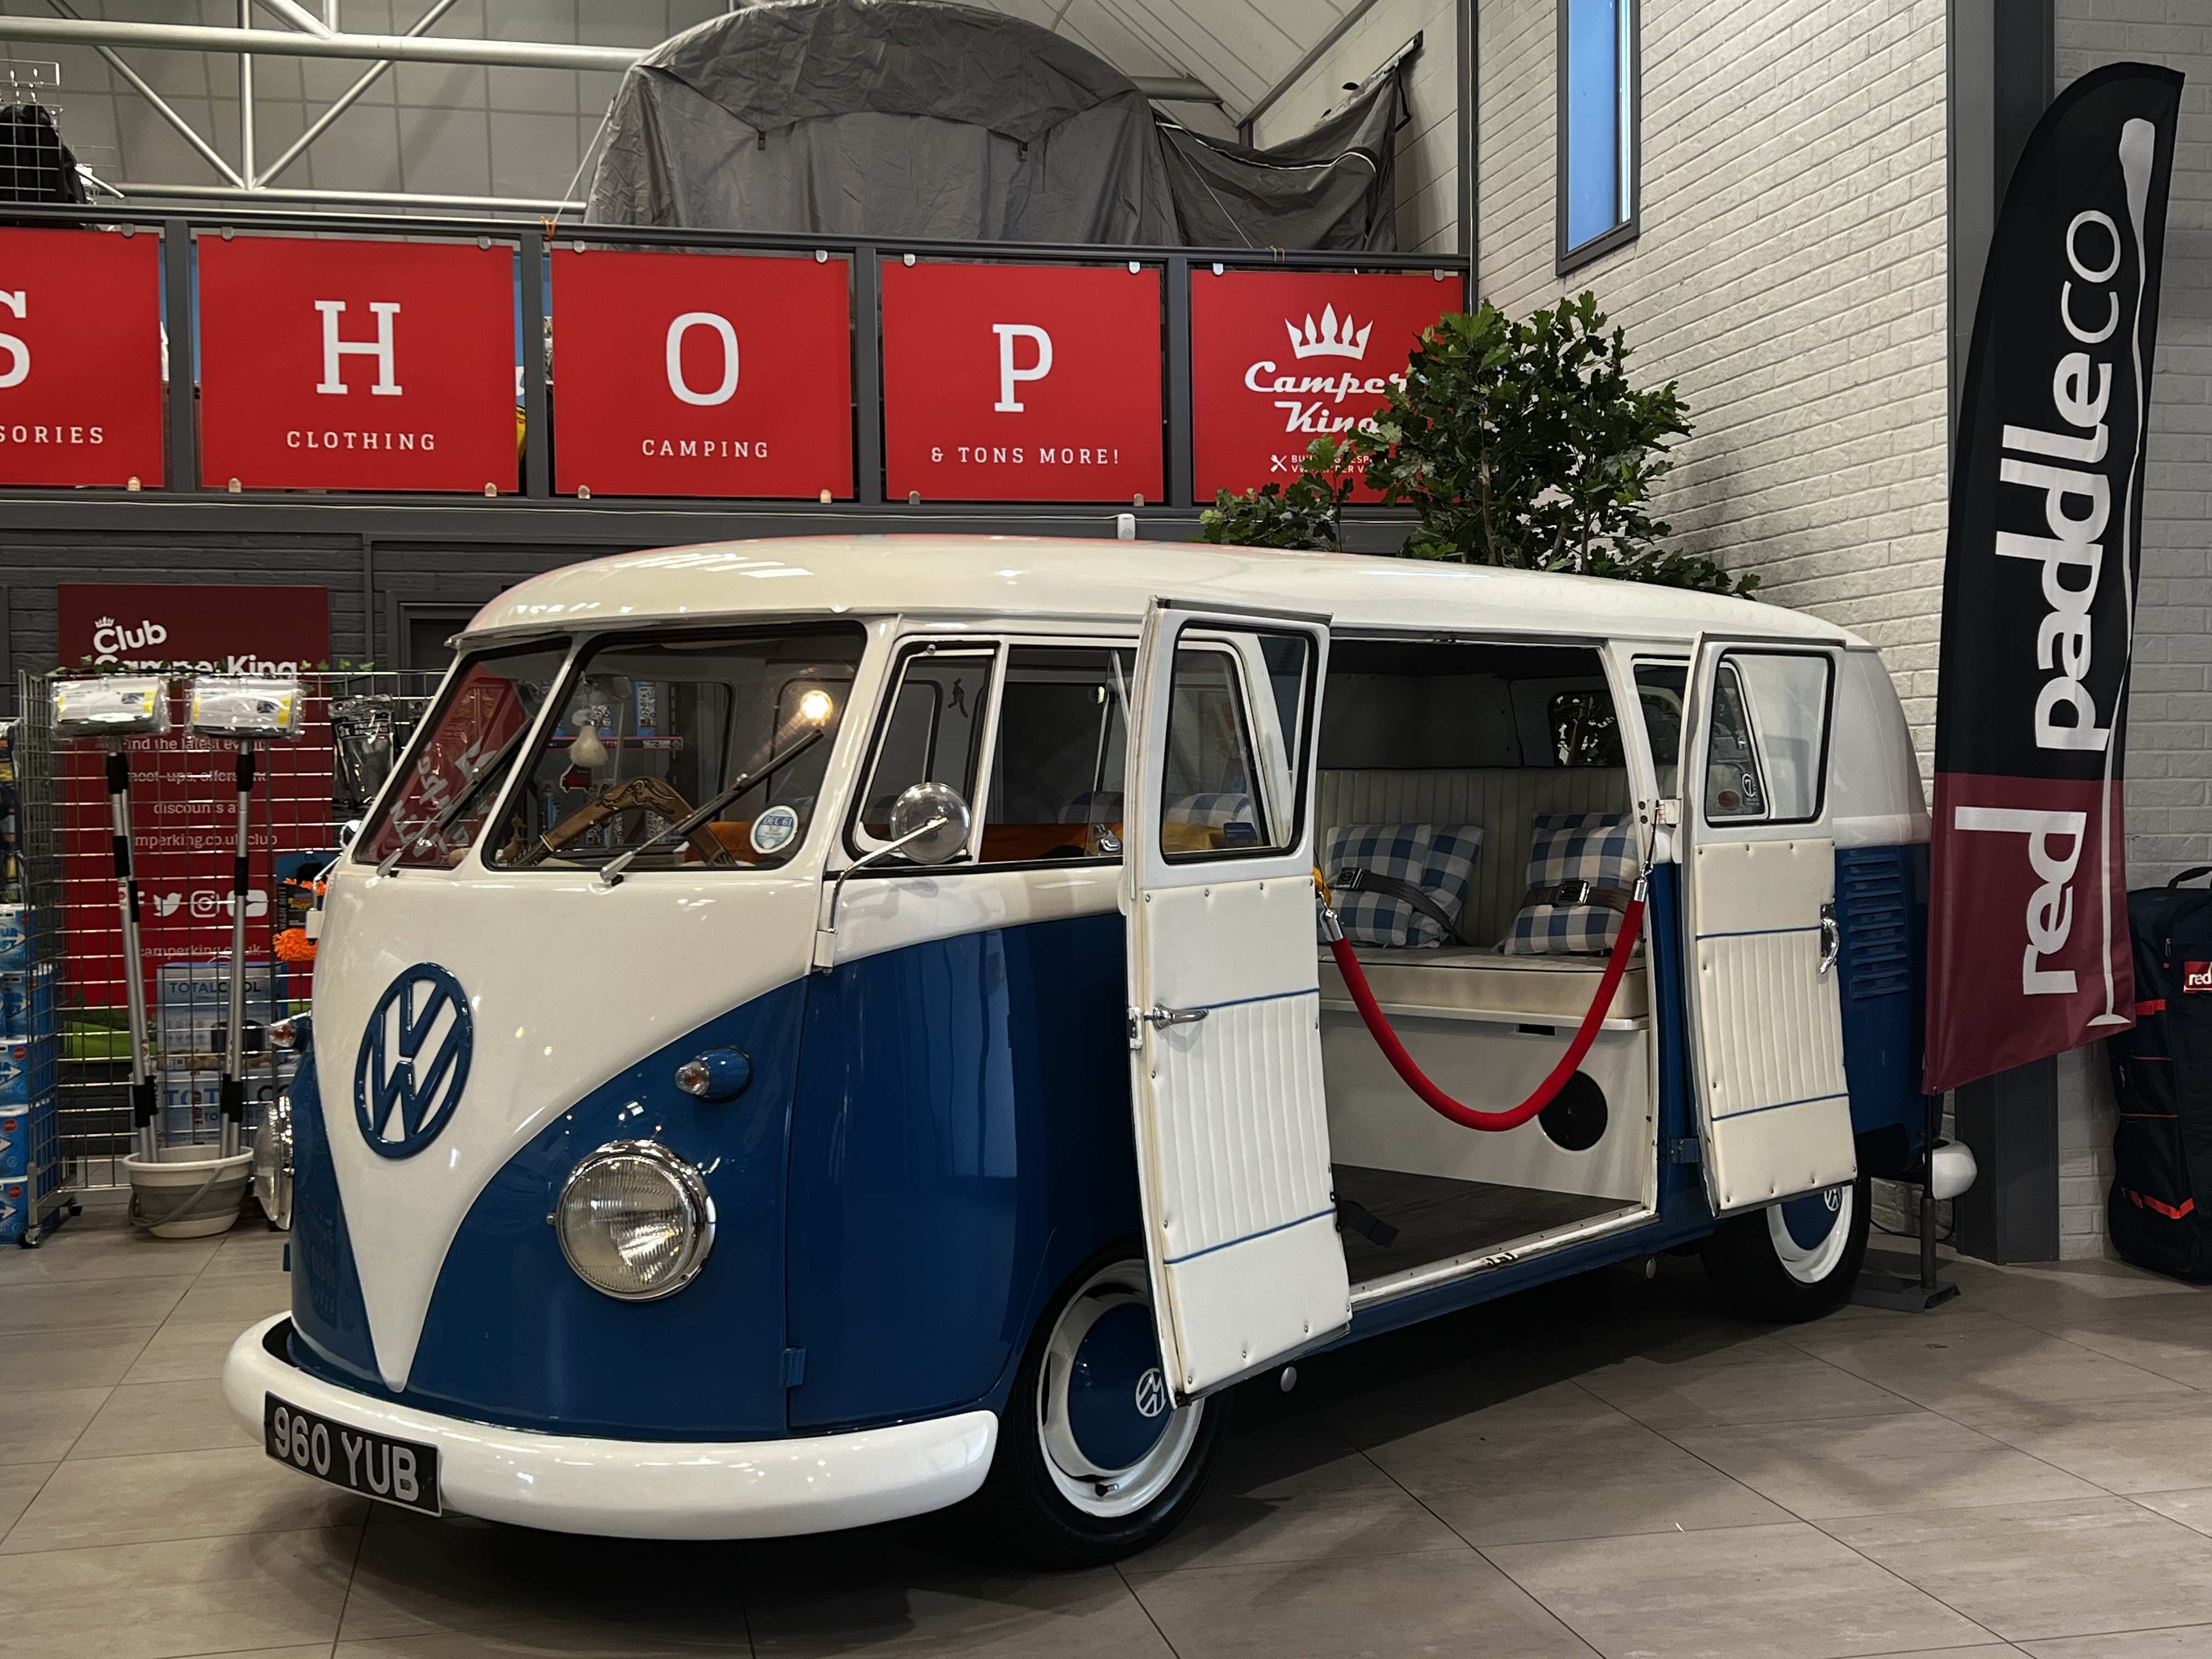 1961 restored 'splitty' makes CamperKing HQ its permanent home